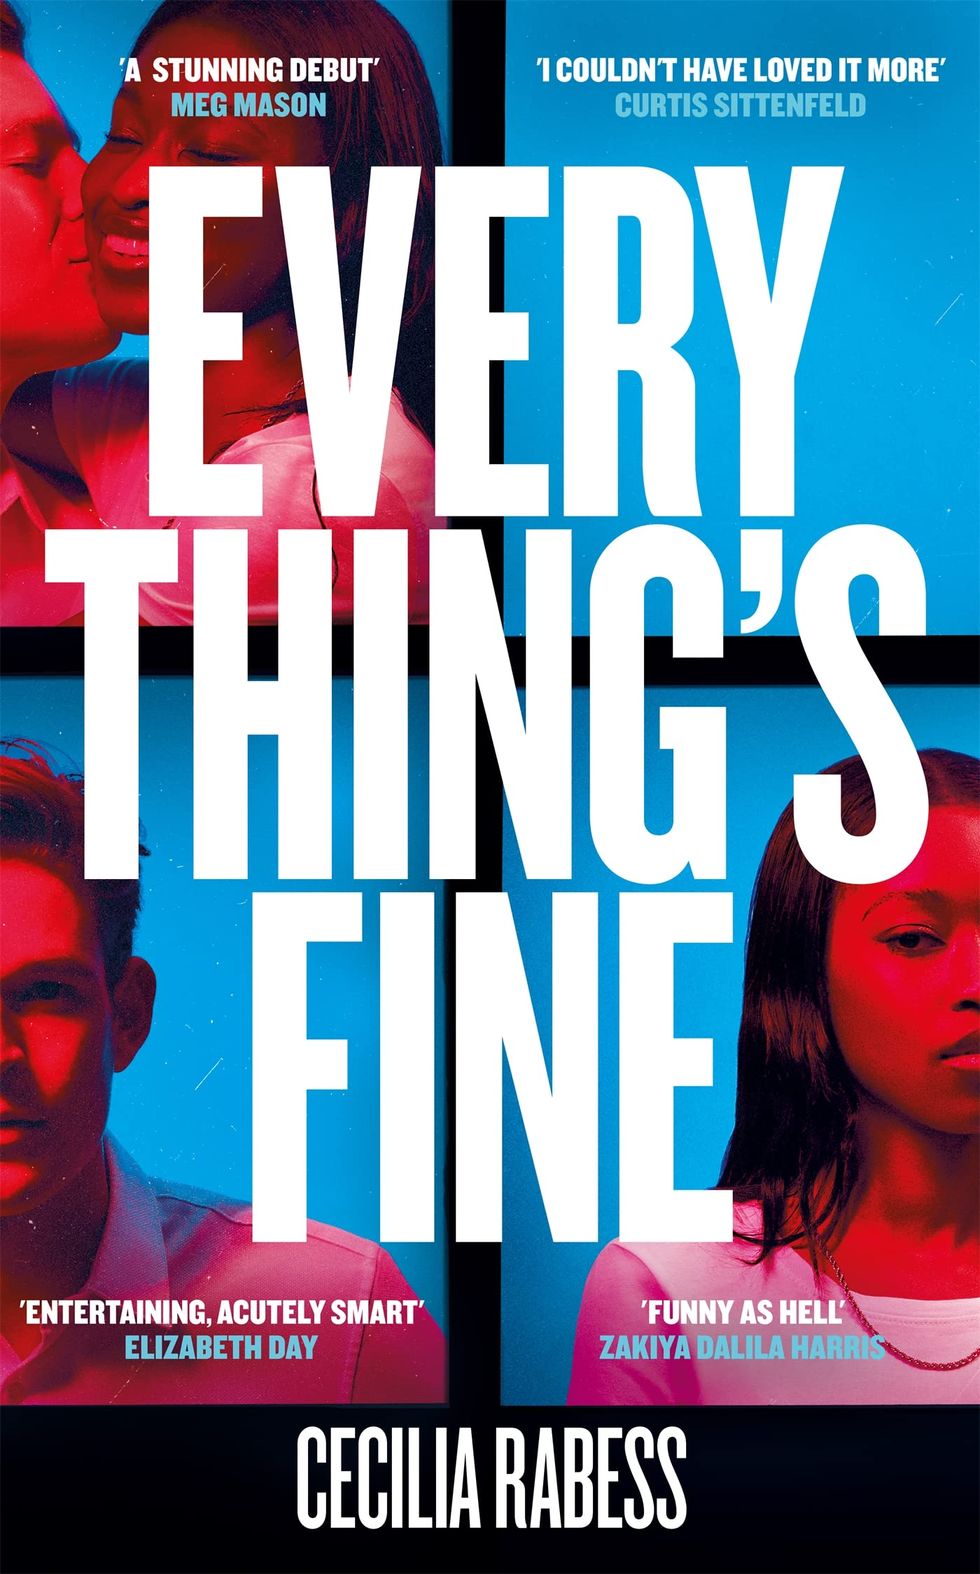 Eizabeth Day's Top Pick: Everything's Fine by Cecilia Rabess